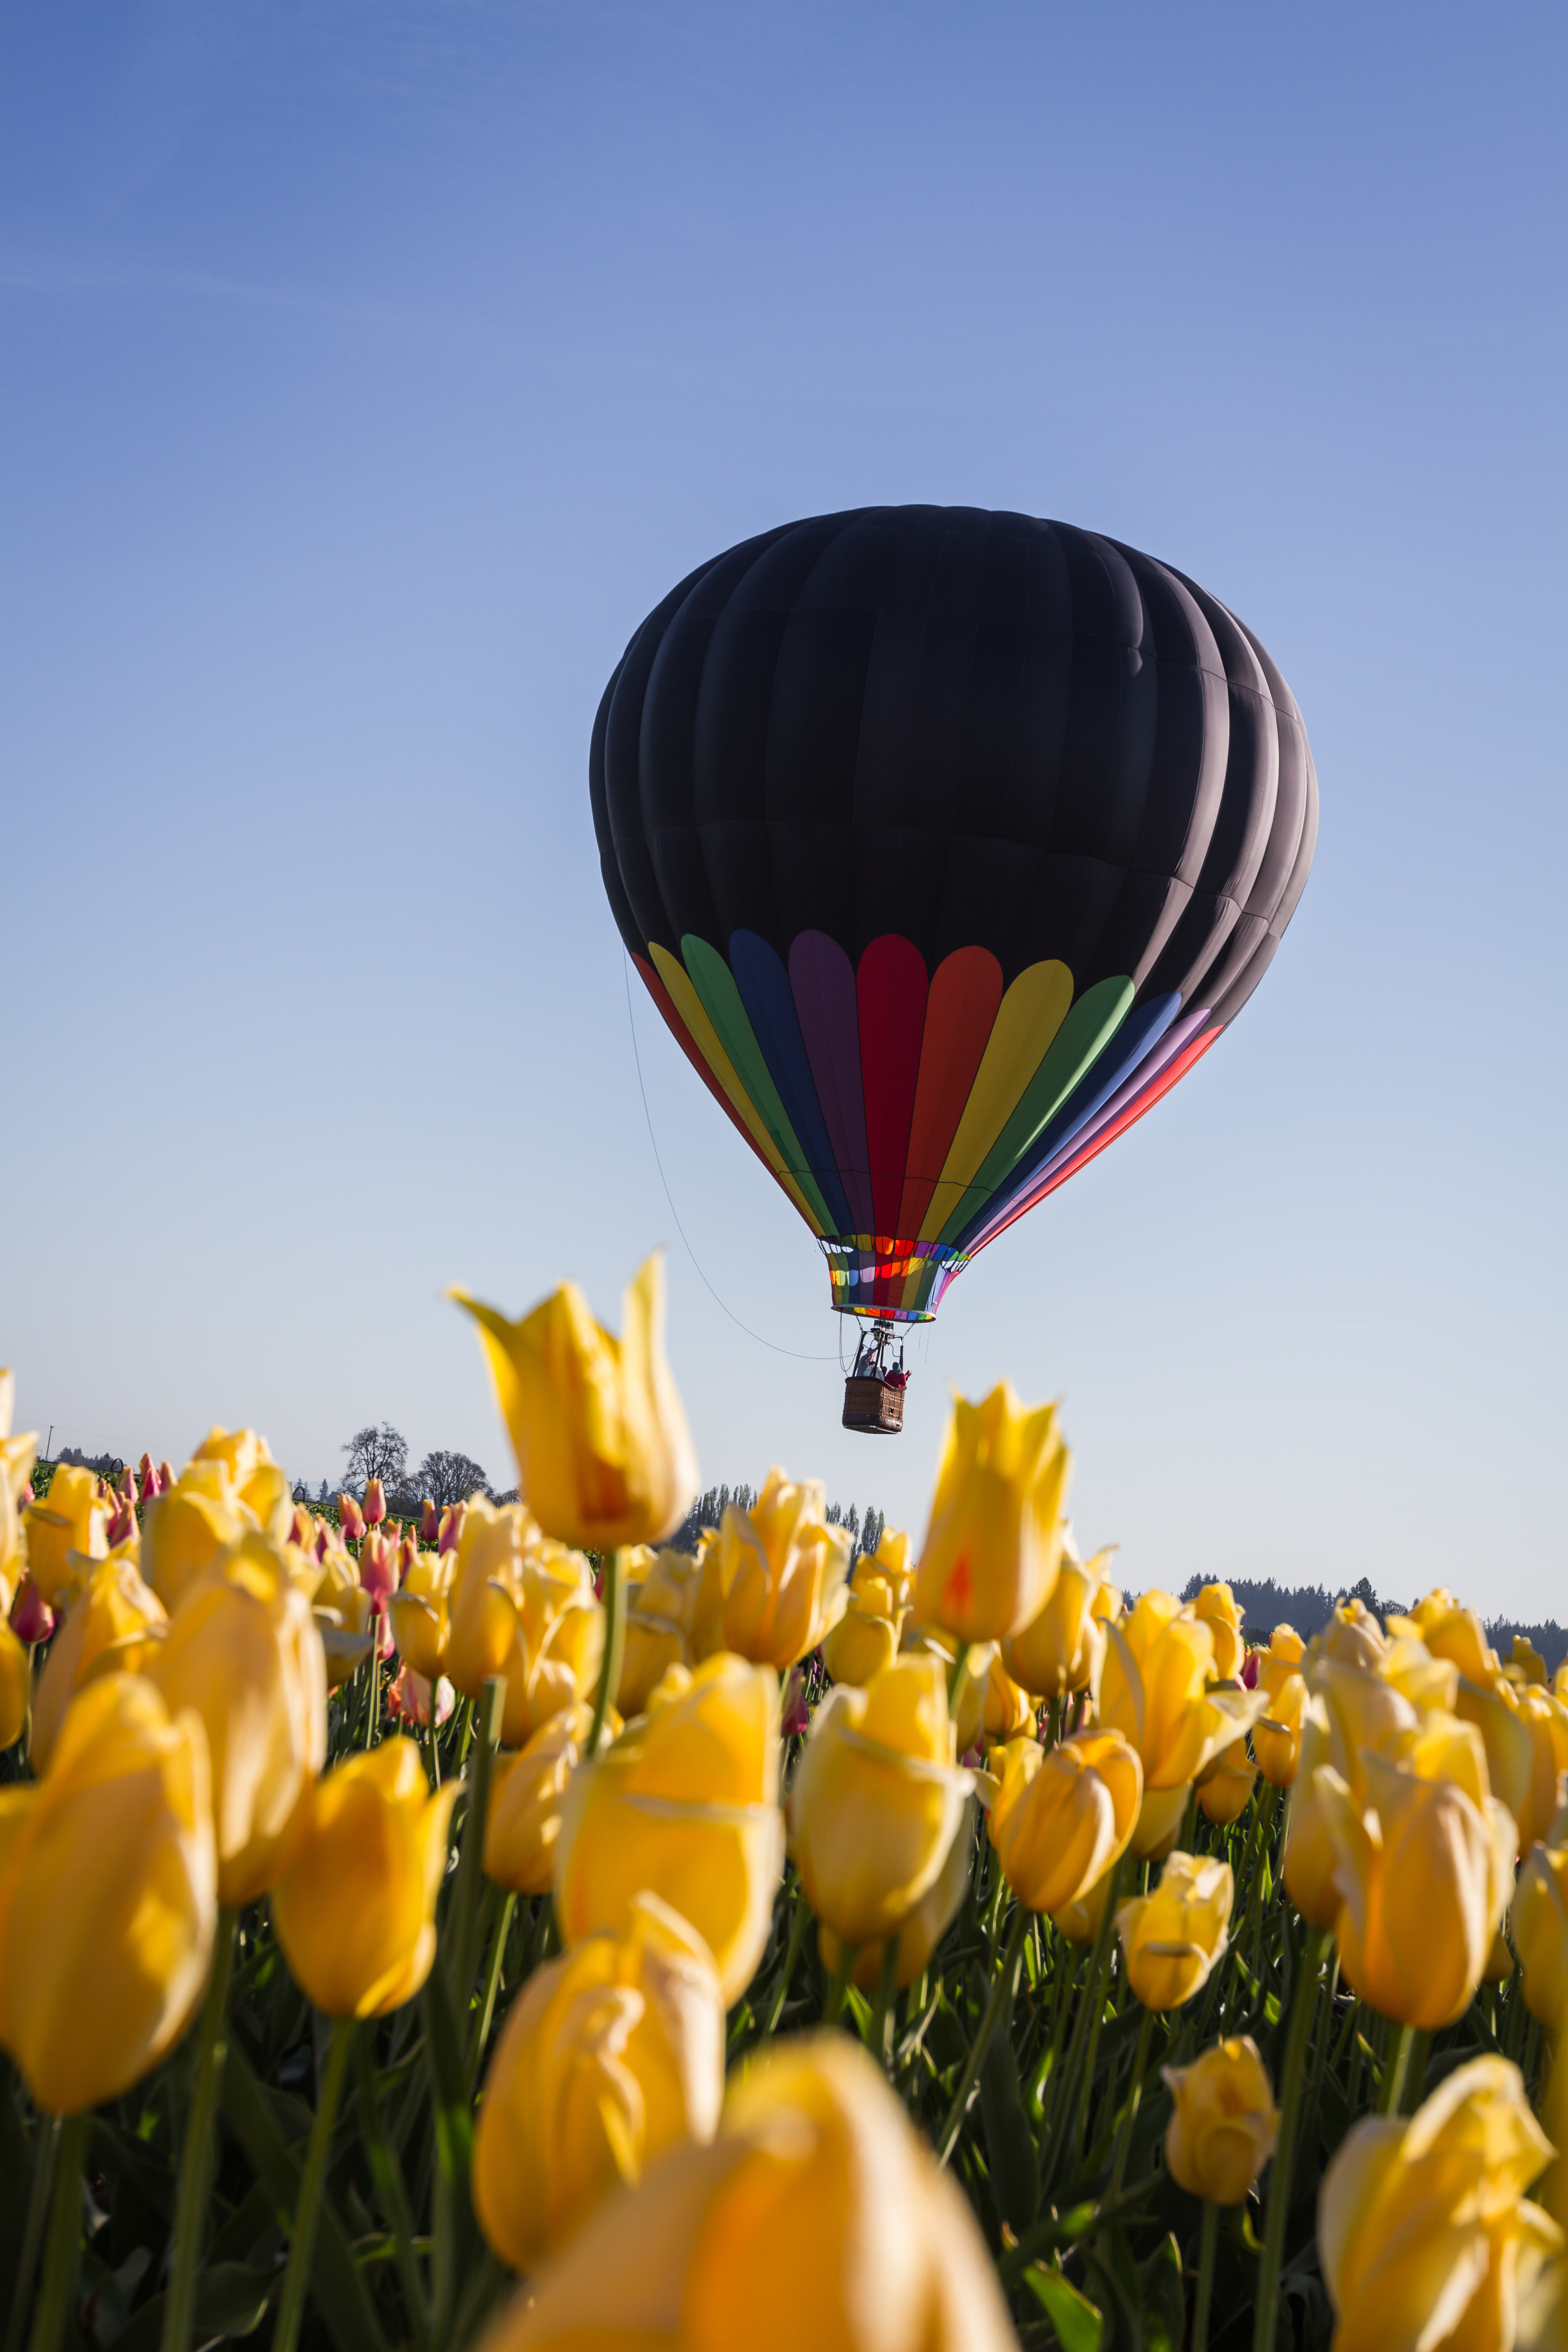 Looking for something to do in Temecula? Take a balloon tour in Temecula. This is a lovely way to see the countryside. See what balloon tour is perfect for your trip.